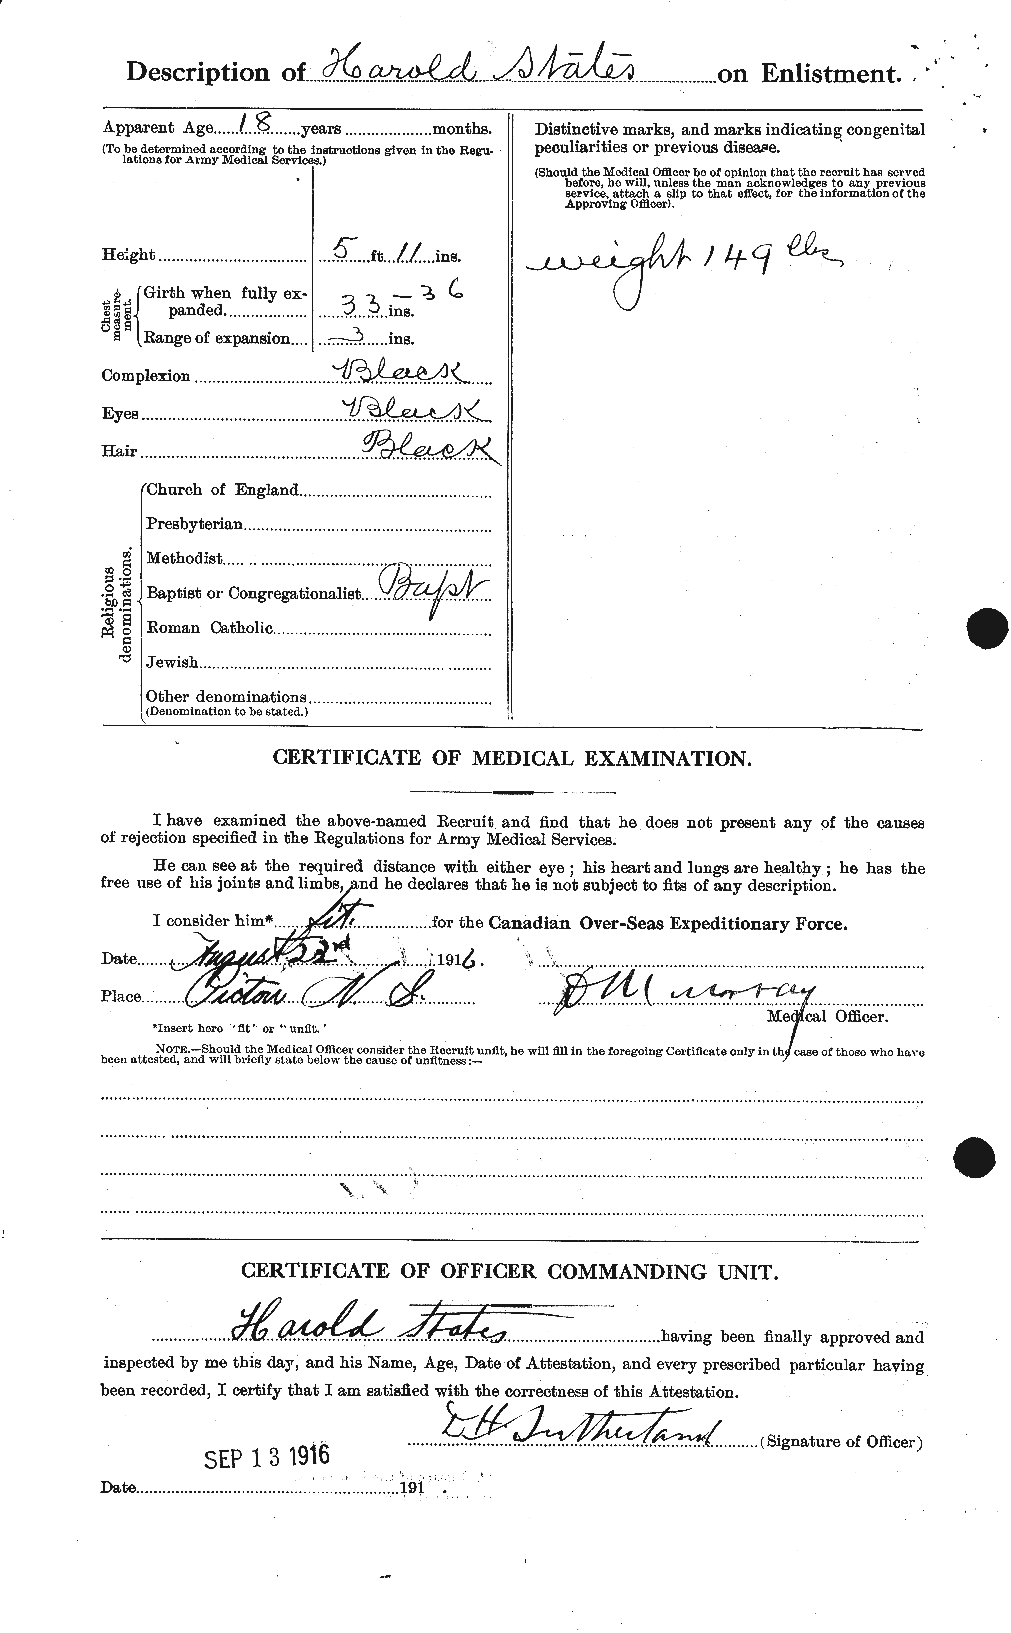 Personnel Records of the First World War - CEF 116128b